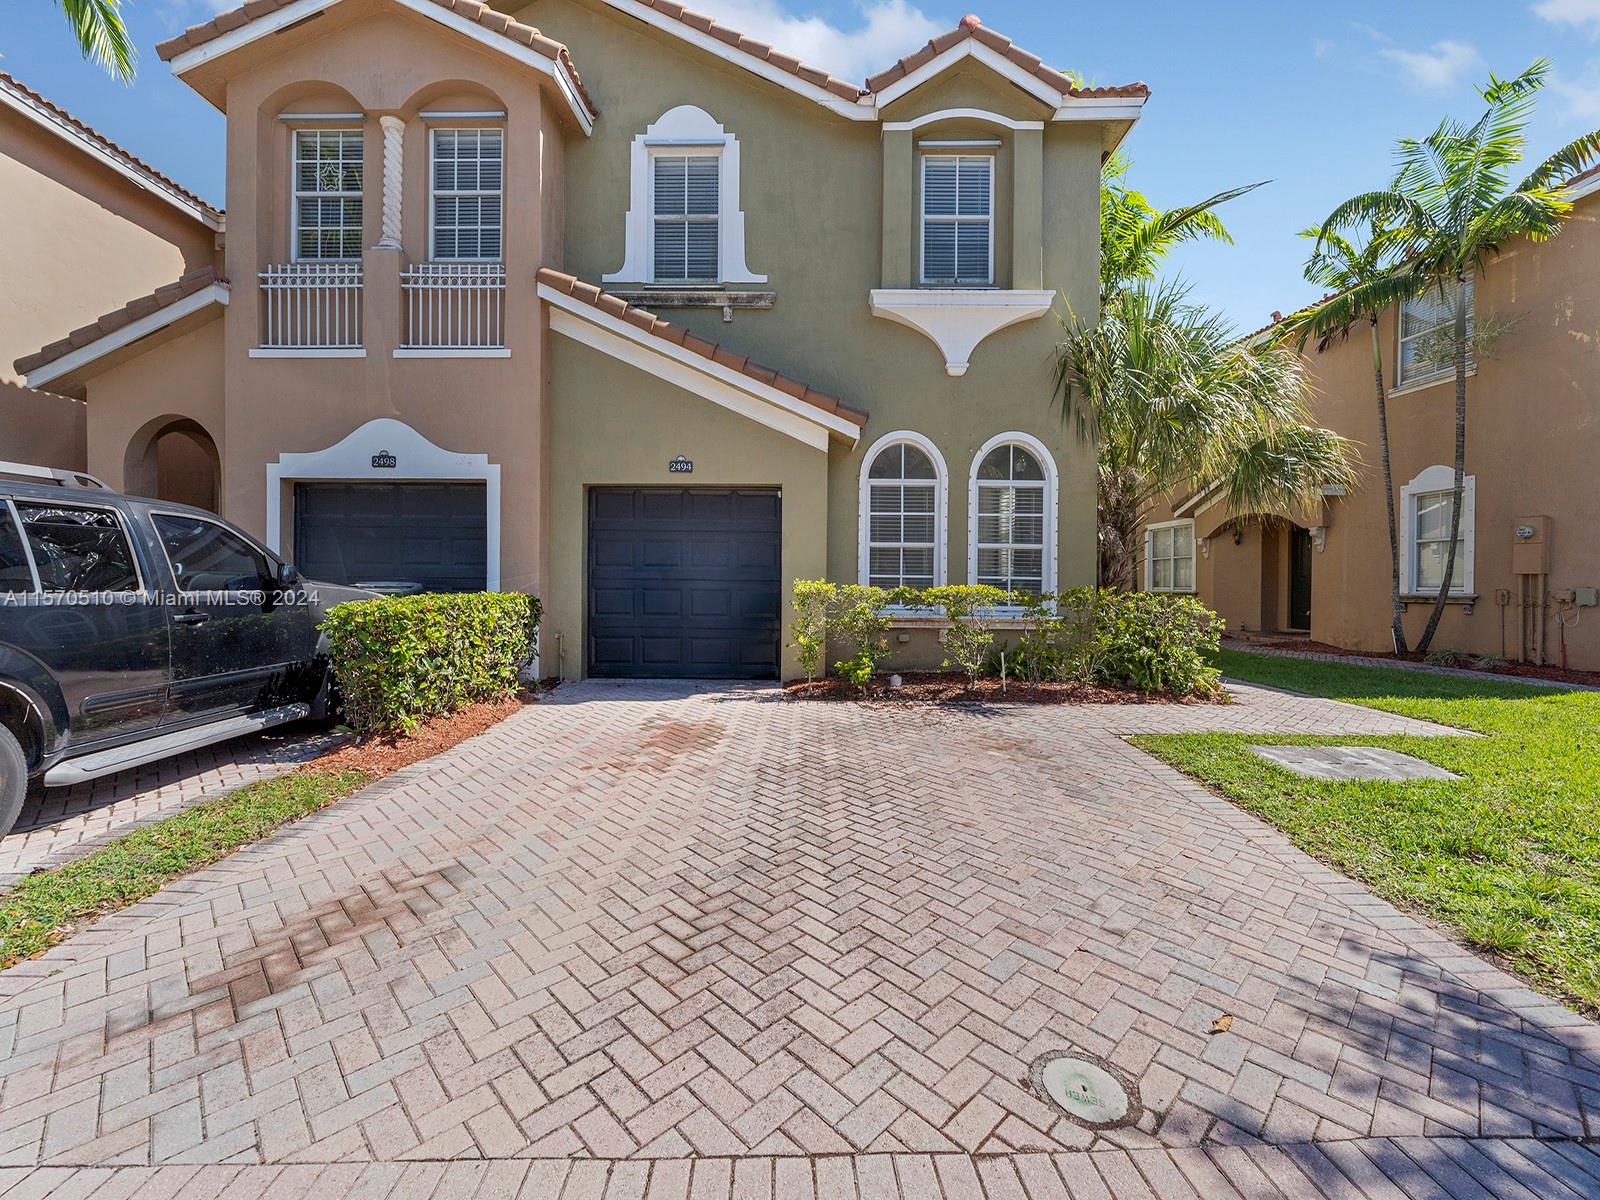 One of the larger floorplans in the submarket with an attached garage with private patio and new HVAC.  Priced to sell, HOA fees include cable / internet.  Community amenities – pool, gym, BBQ area.  Working with a preferred direct lender to minimize buyer costs.